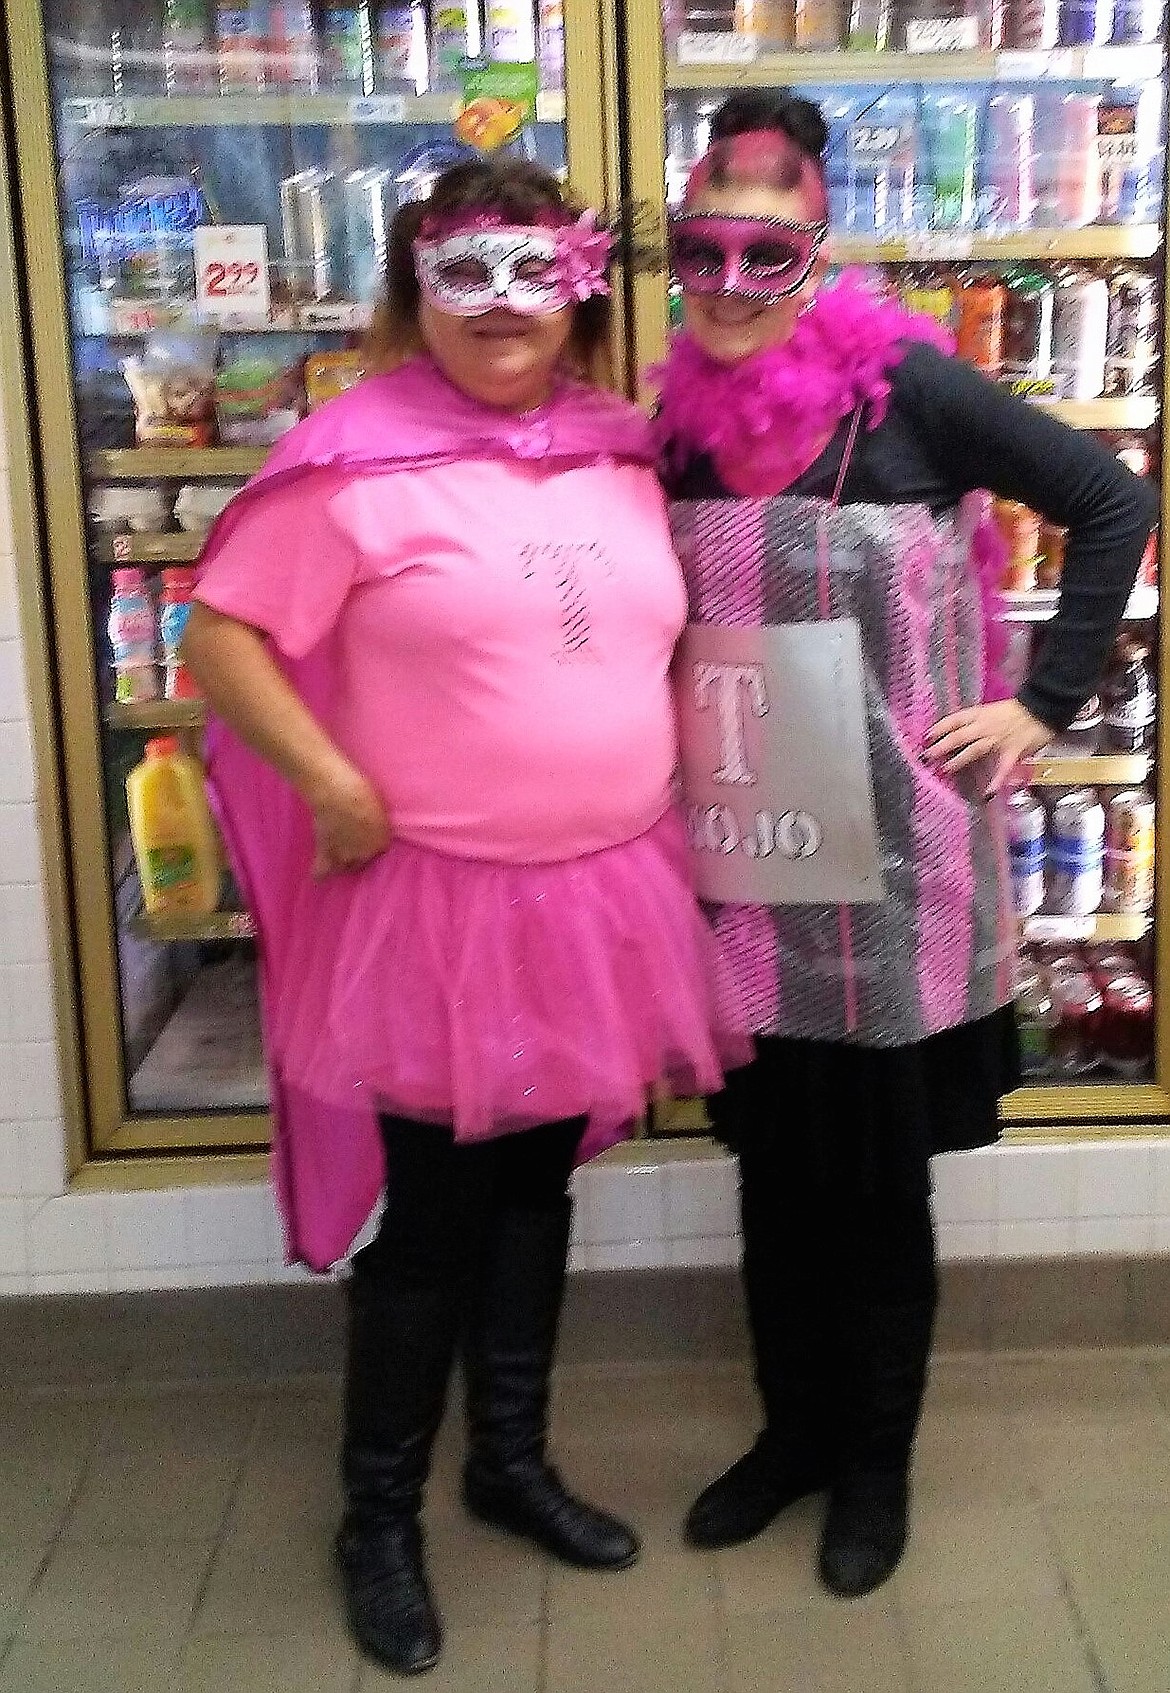 Tammy and Karen working at Exxon in St. Regis get into the &#147;spirit&#148; of things on Halloween. (Photo by Brenda White)